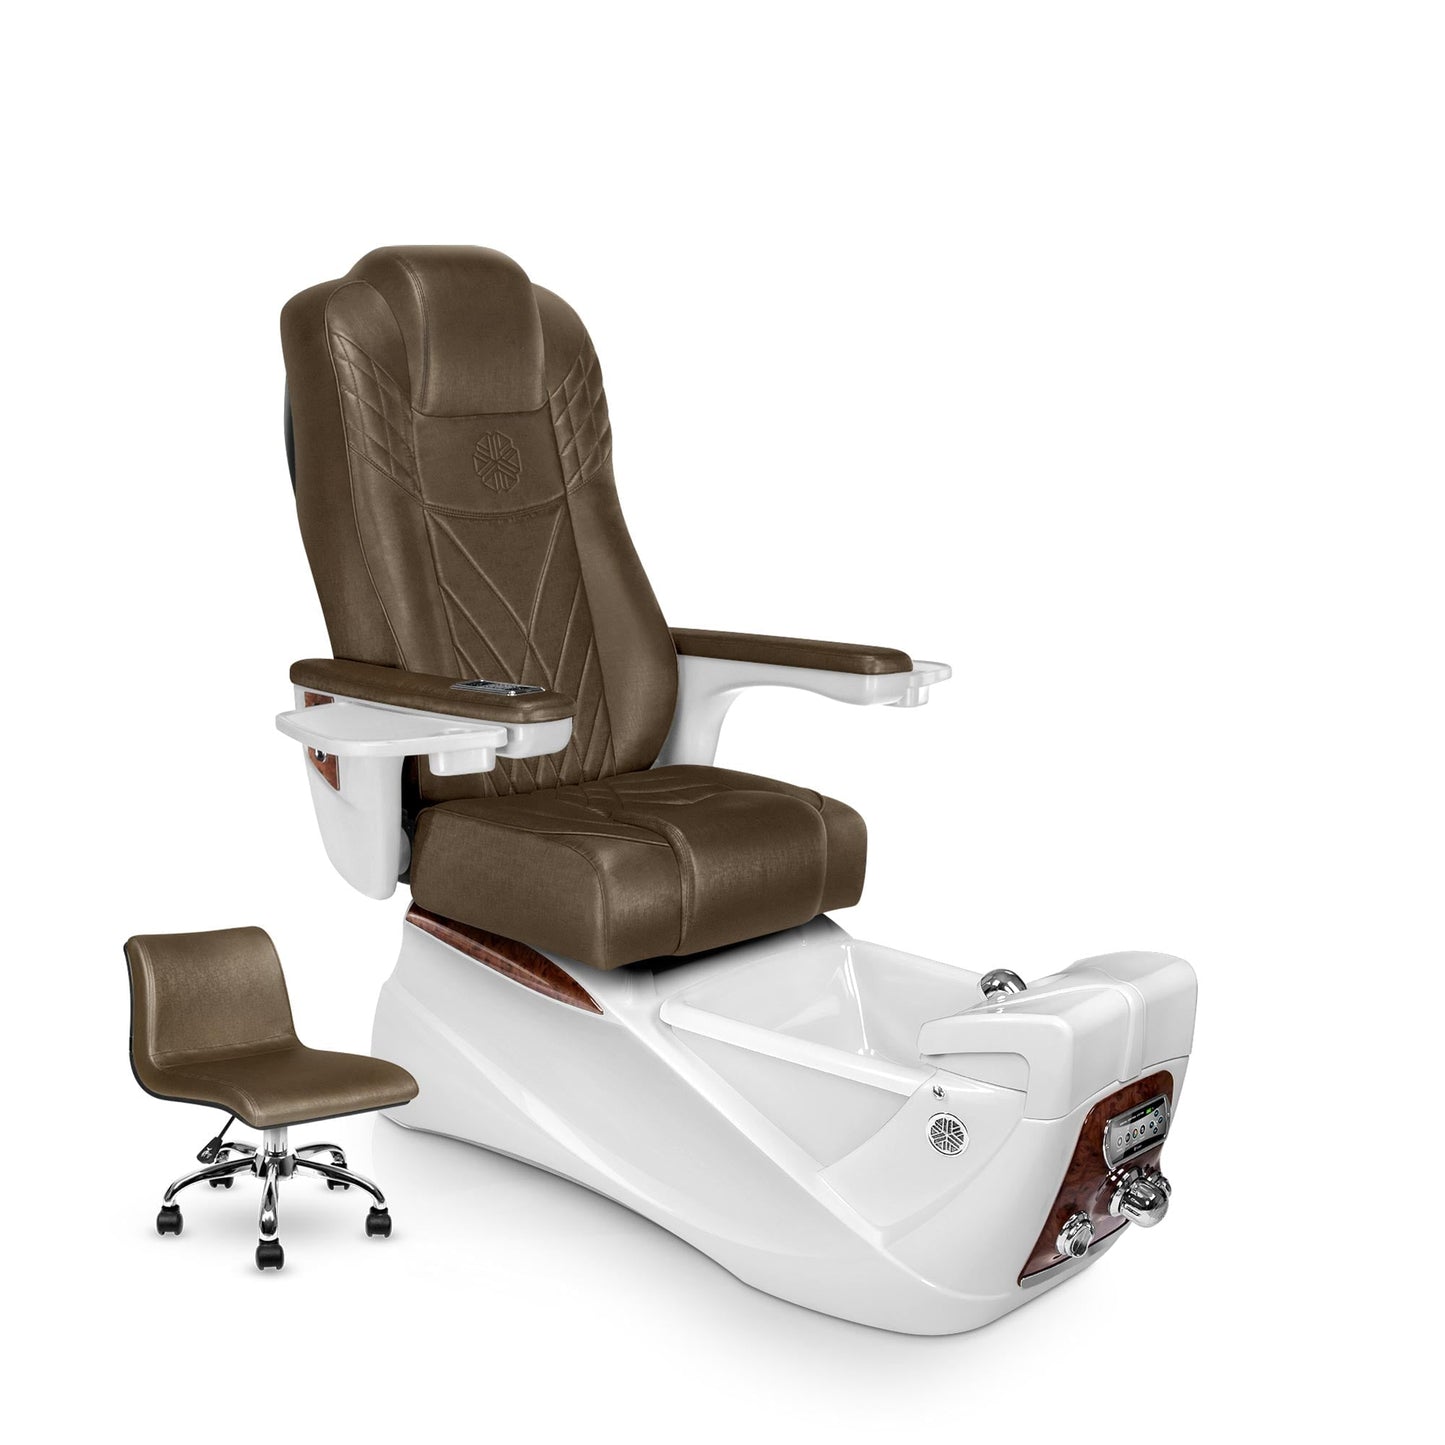 Lexor INFINITY pedicure chair with cola cushion and white pearl spa base